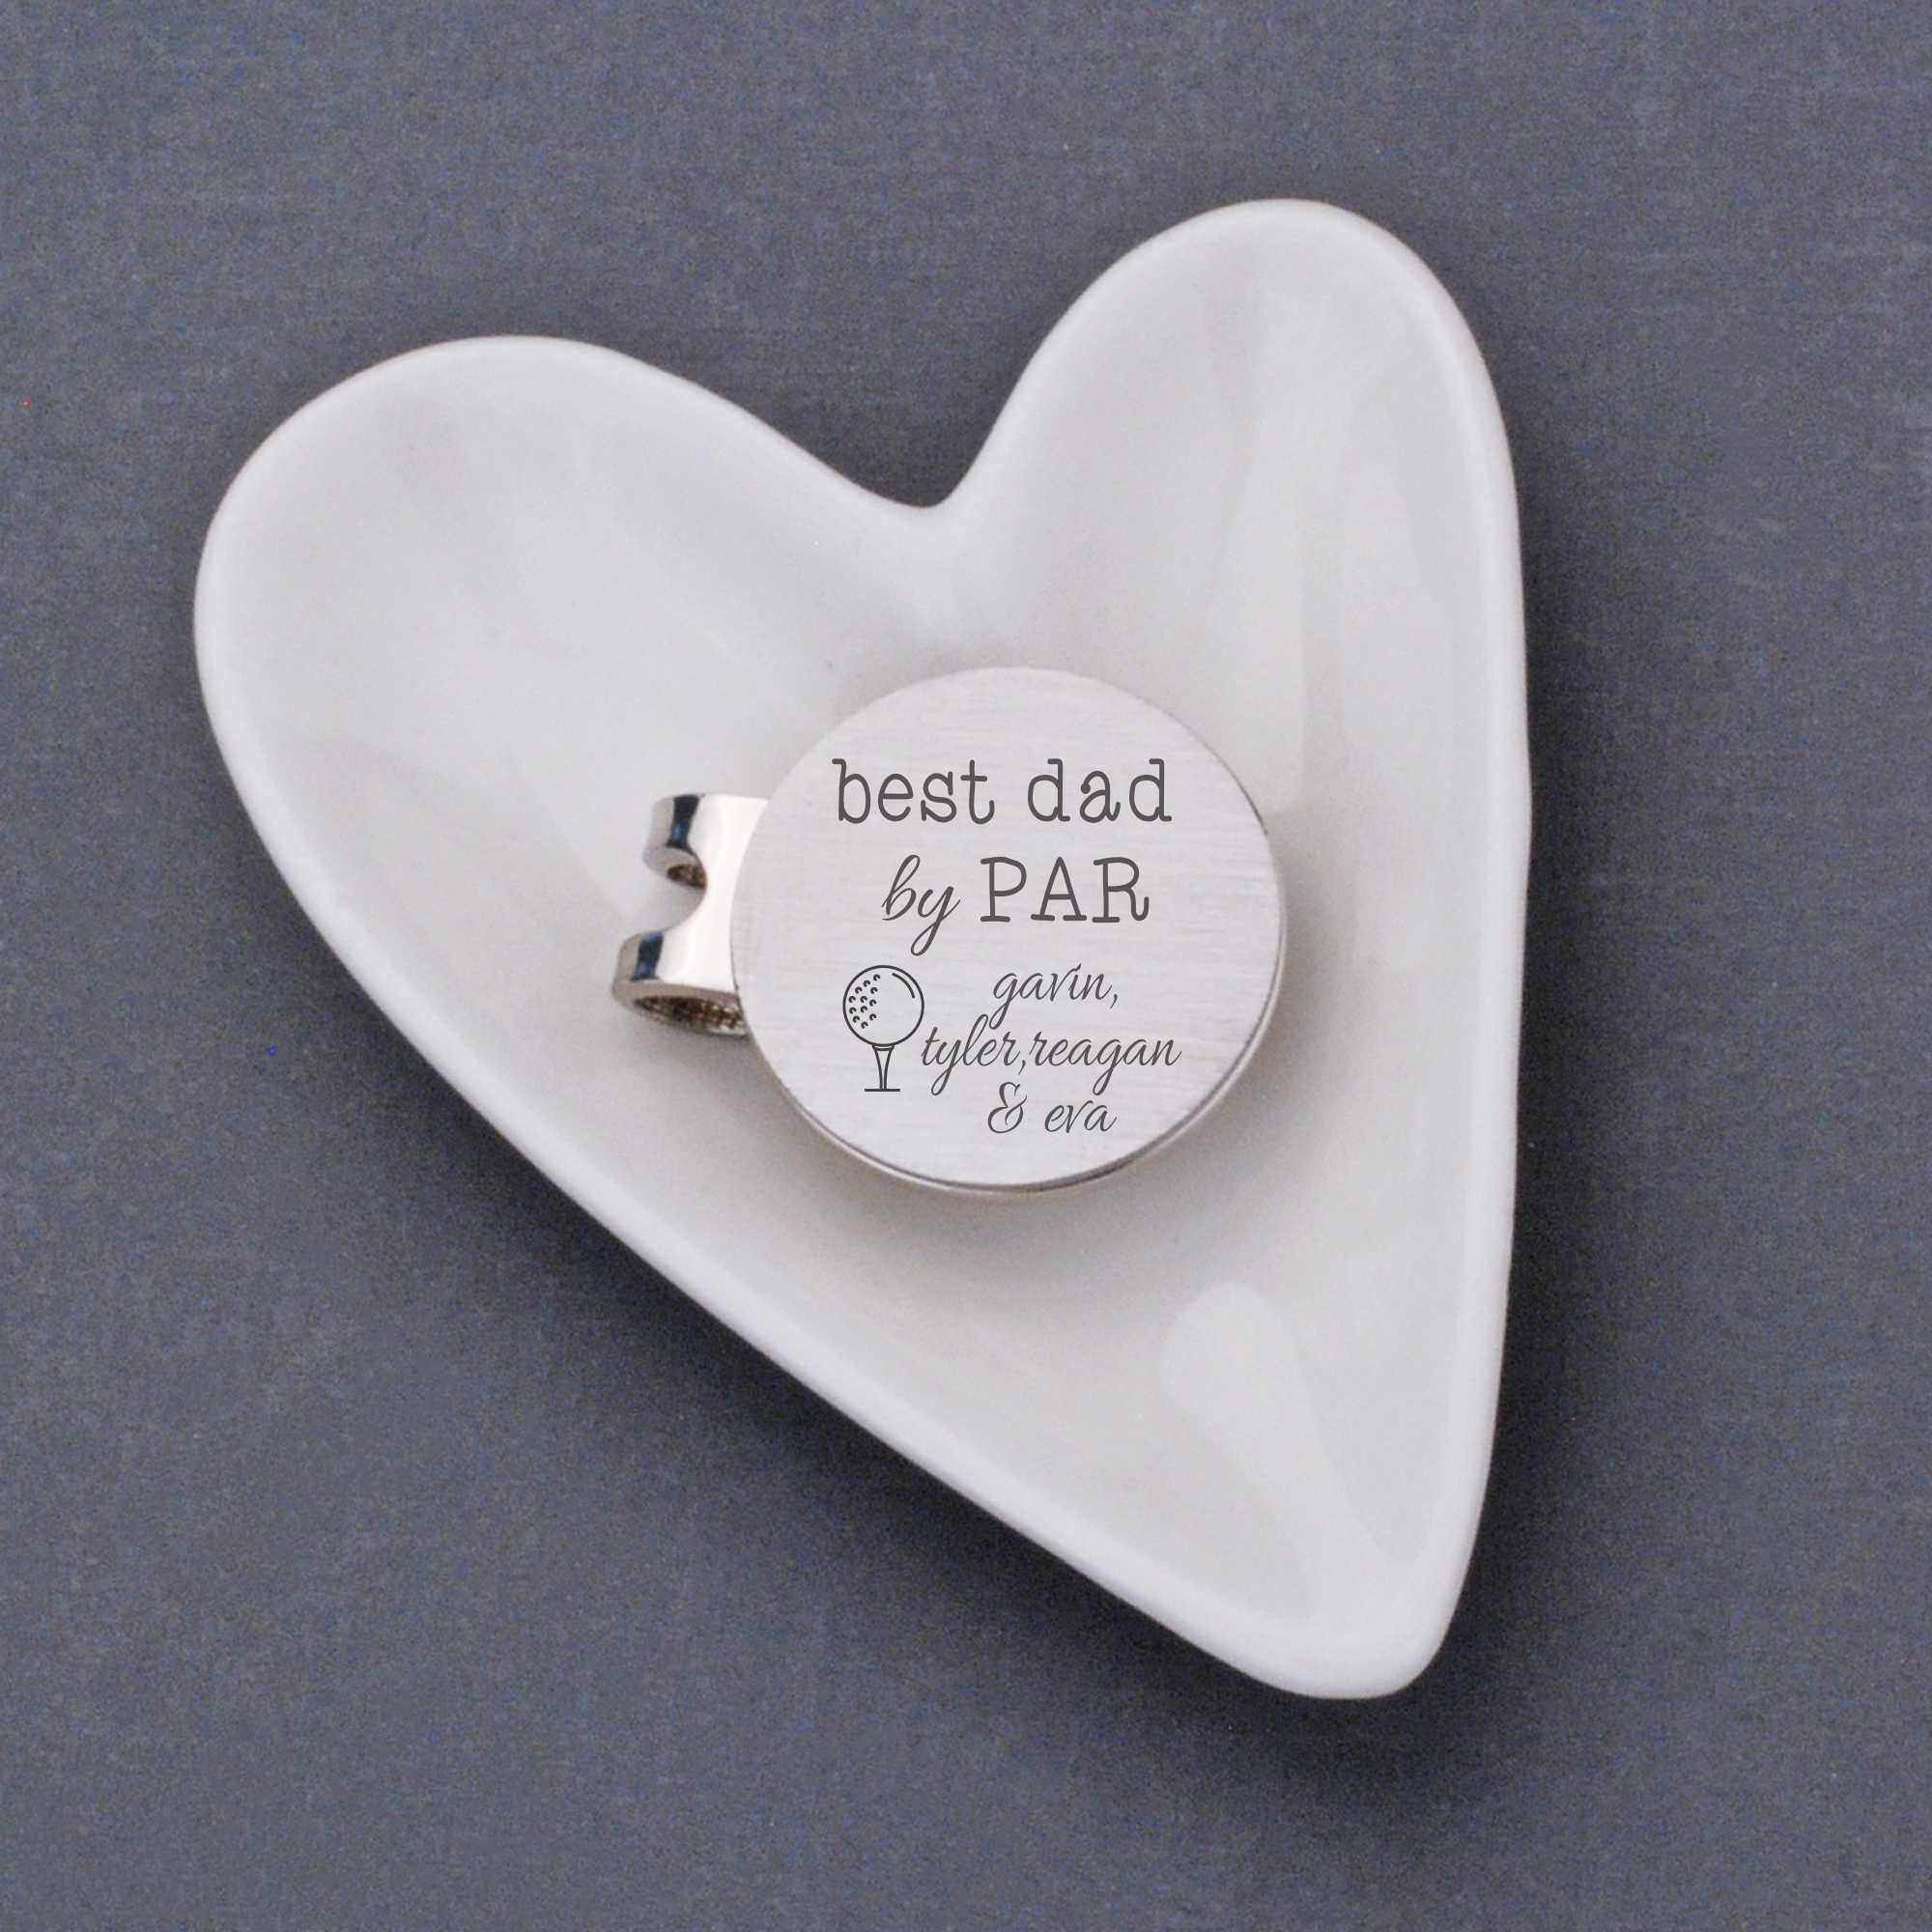 Golf Ball Marker for Fathers Day, Best Dad by Par Gifts from Daughter Son, Golfer  Golf Lover Birthday Christmas Gift for Dad Daddy Grandpa, Father Husband  Gifts from Daughter Wife, Magnetic Hat